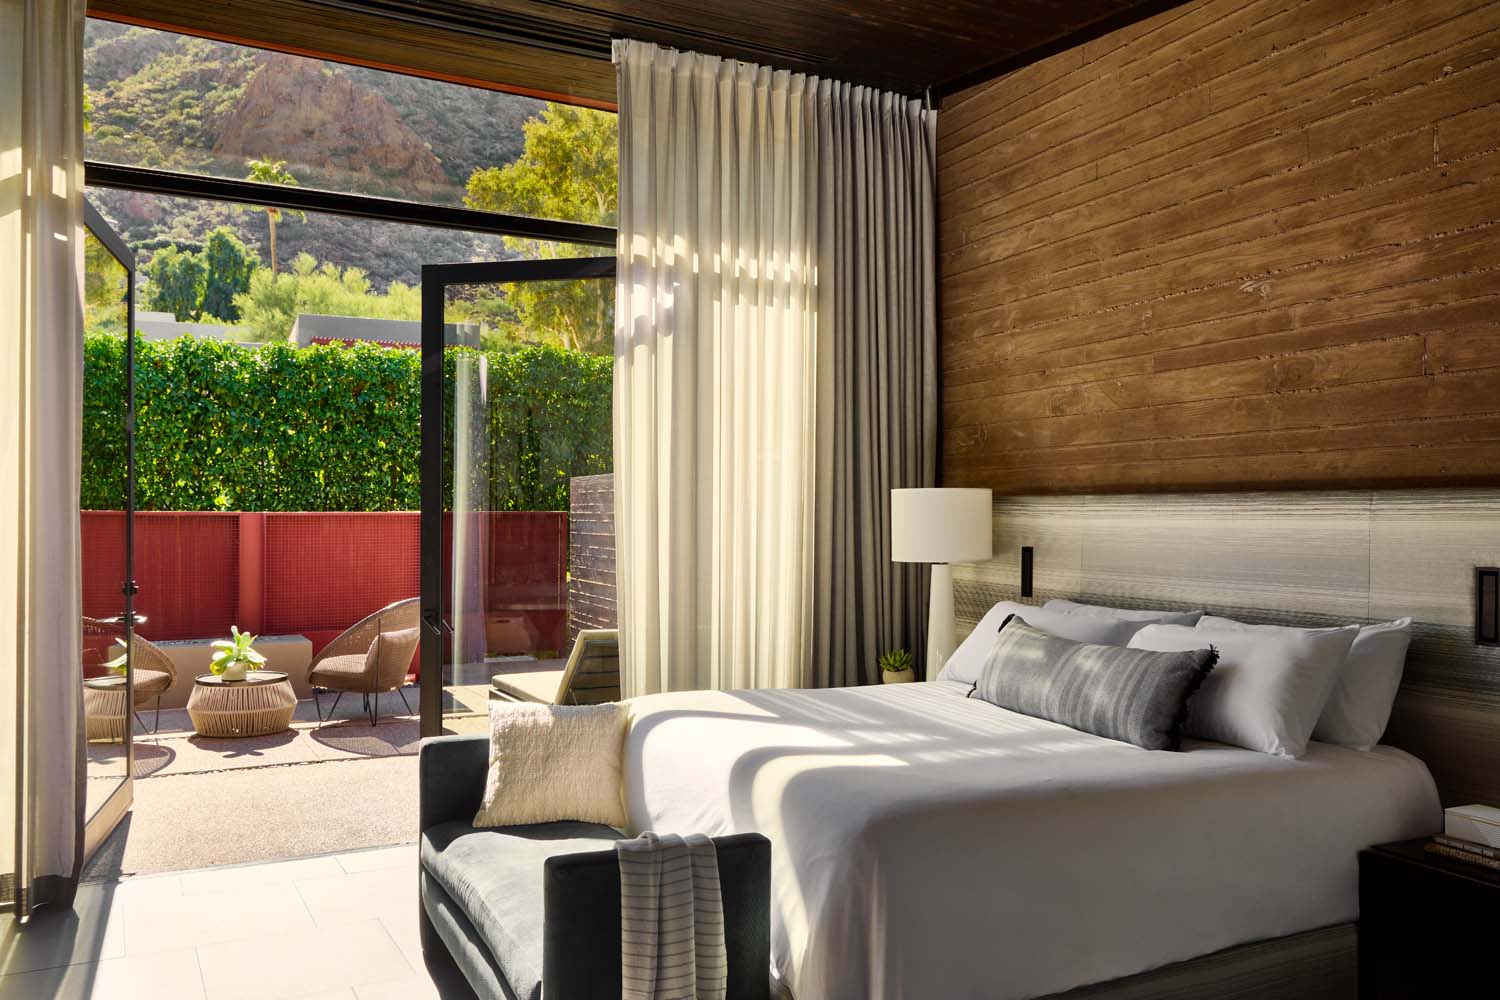 A guest room at Sanctuary Camelback Mountain, A Gurney's Resort & Spa